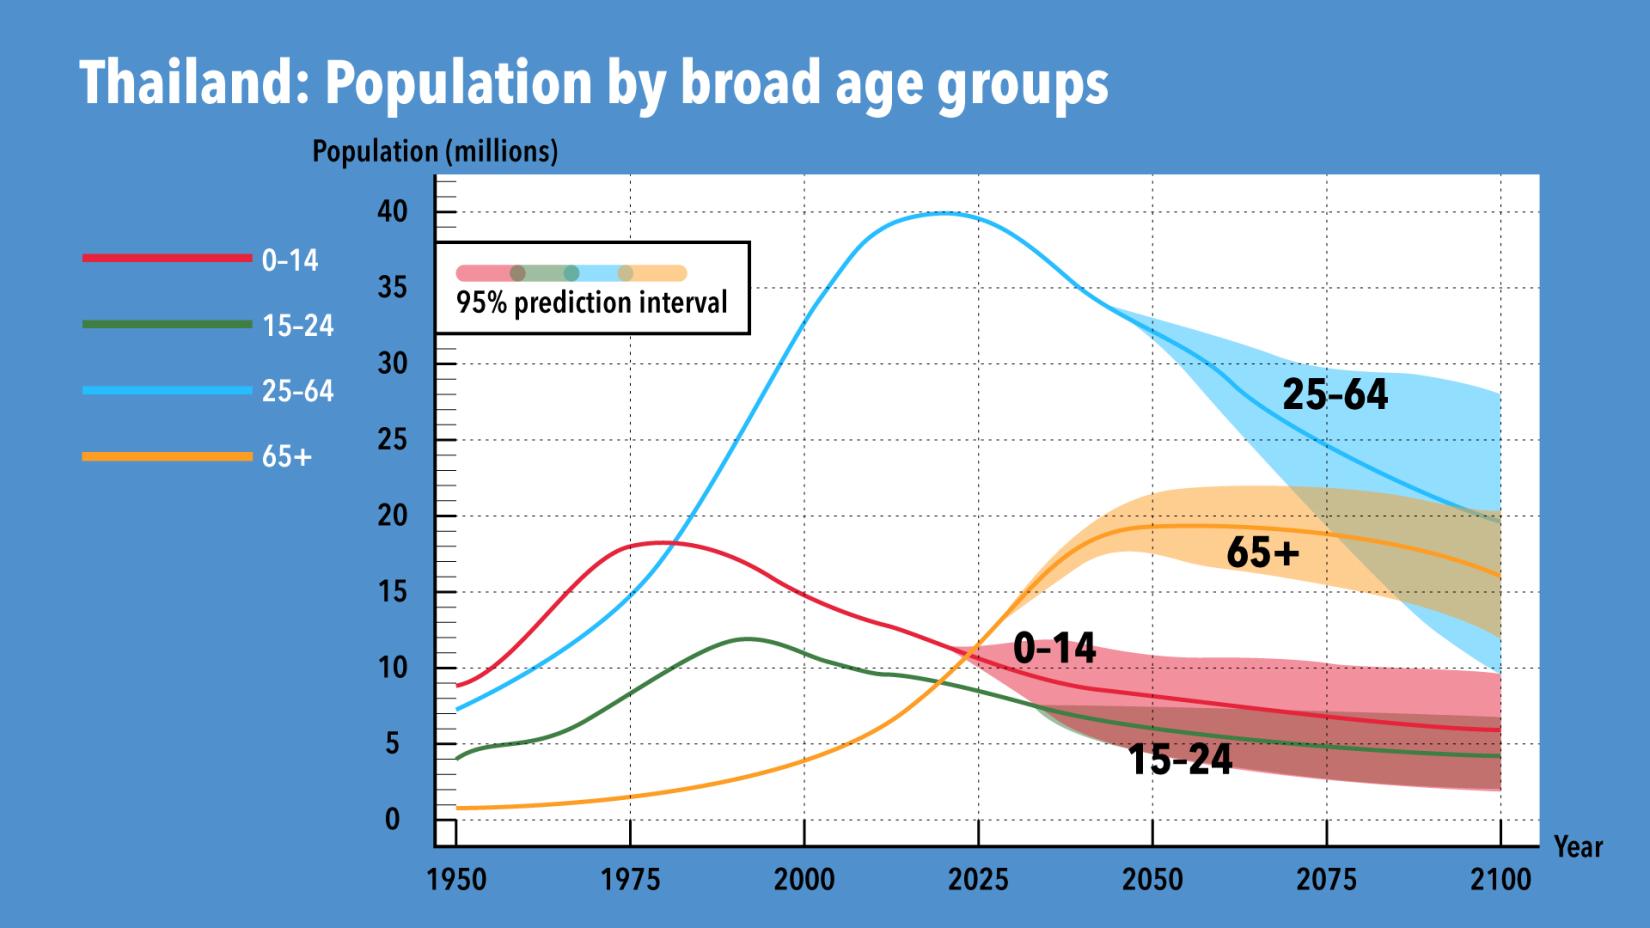 Proportion of working age population will be gradually decline by 2025